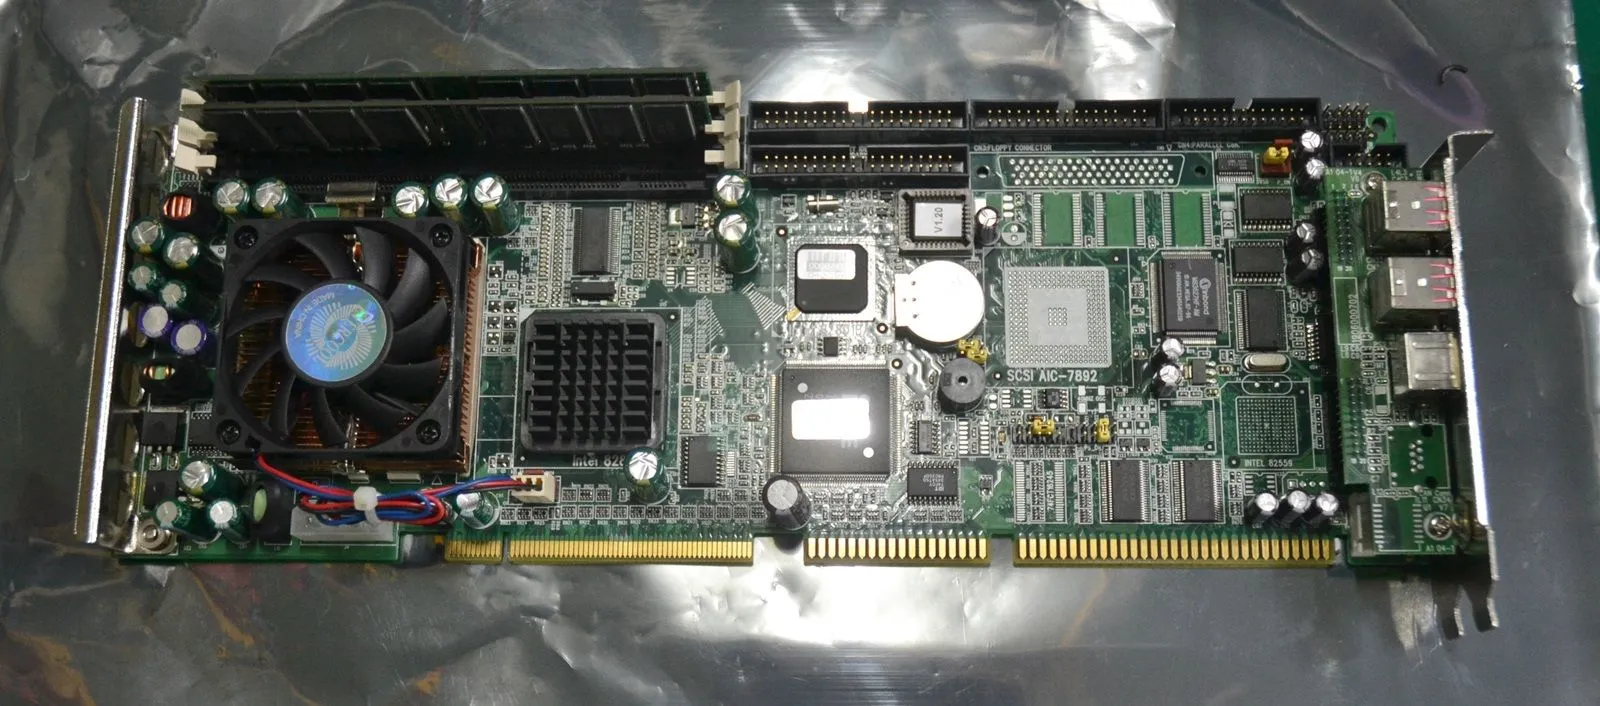 original Industrial Motherboard Advantech PCA-6180E SBC Single Board Computer 100% tested working,used, in good condition